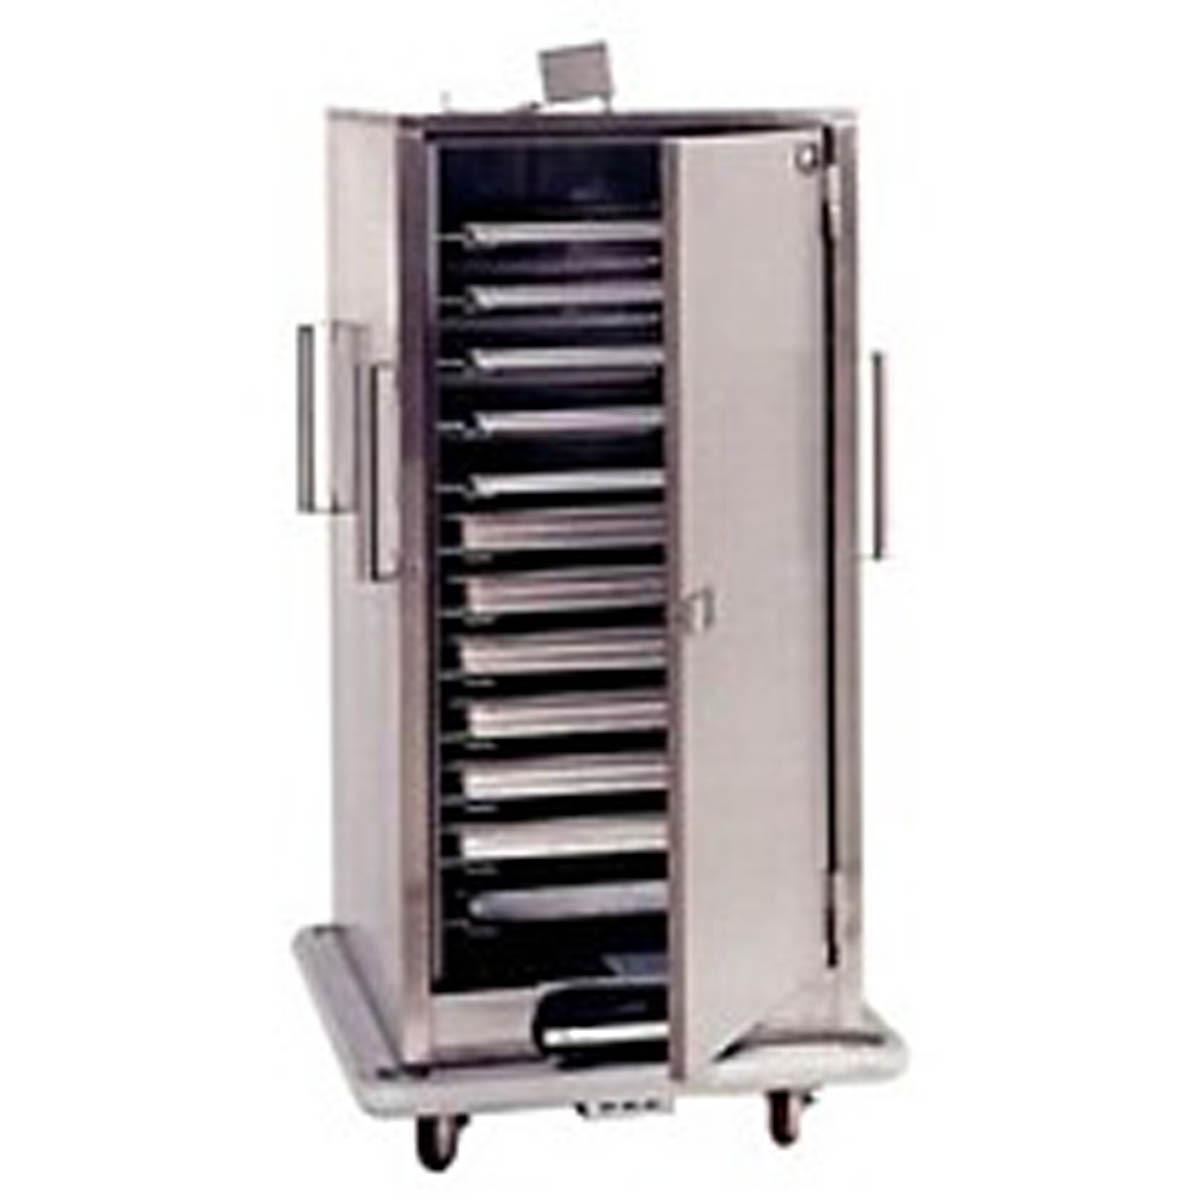 Carter-Hoffmann PH1410 Insulated Mobile Heated Cabinet, (15) Tray Capacity